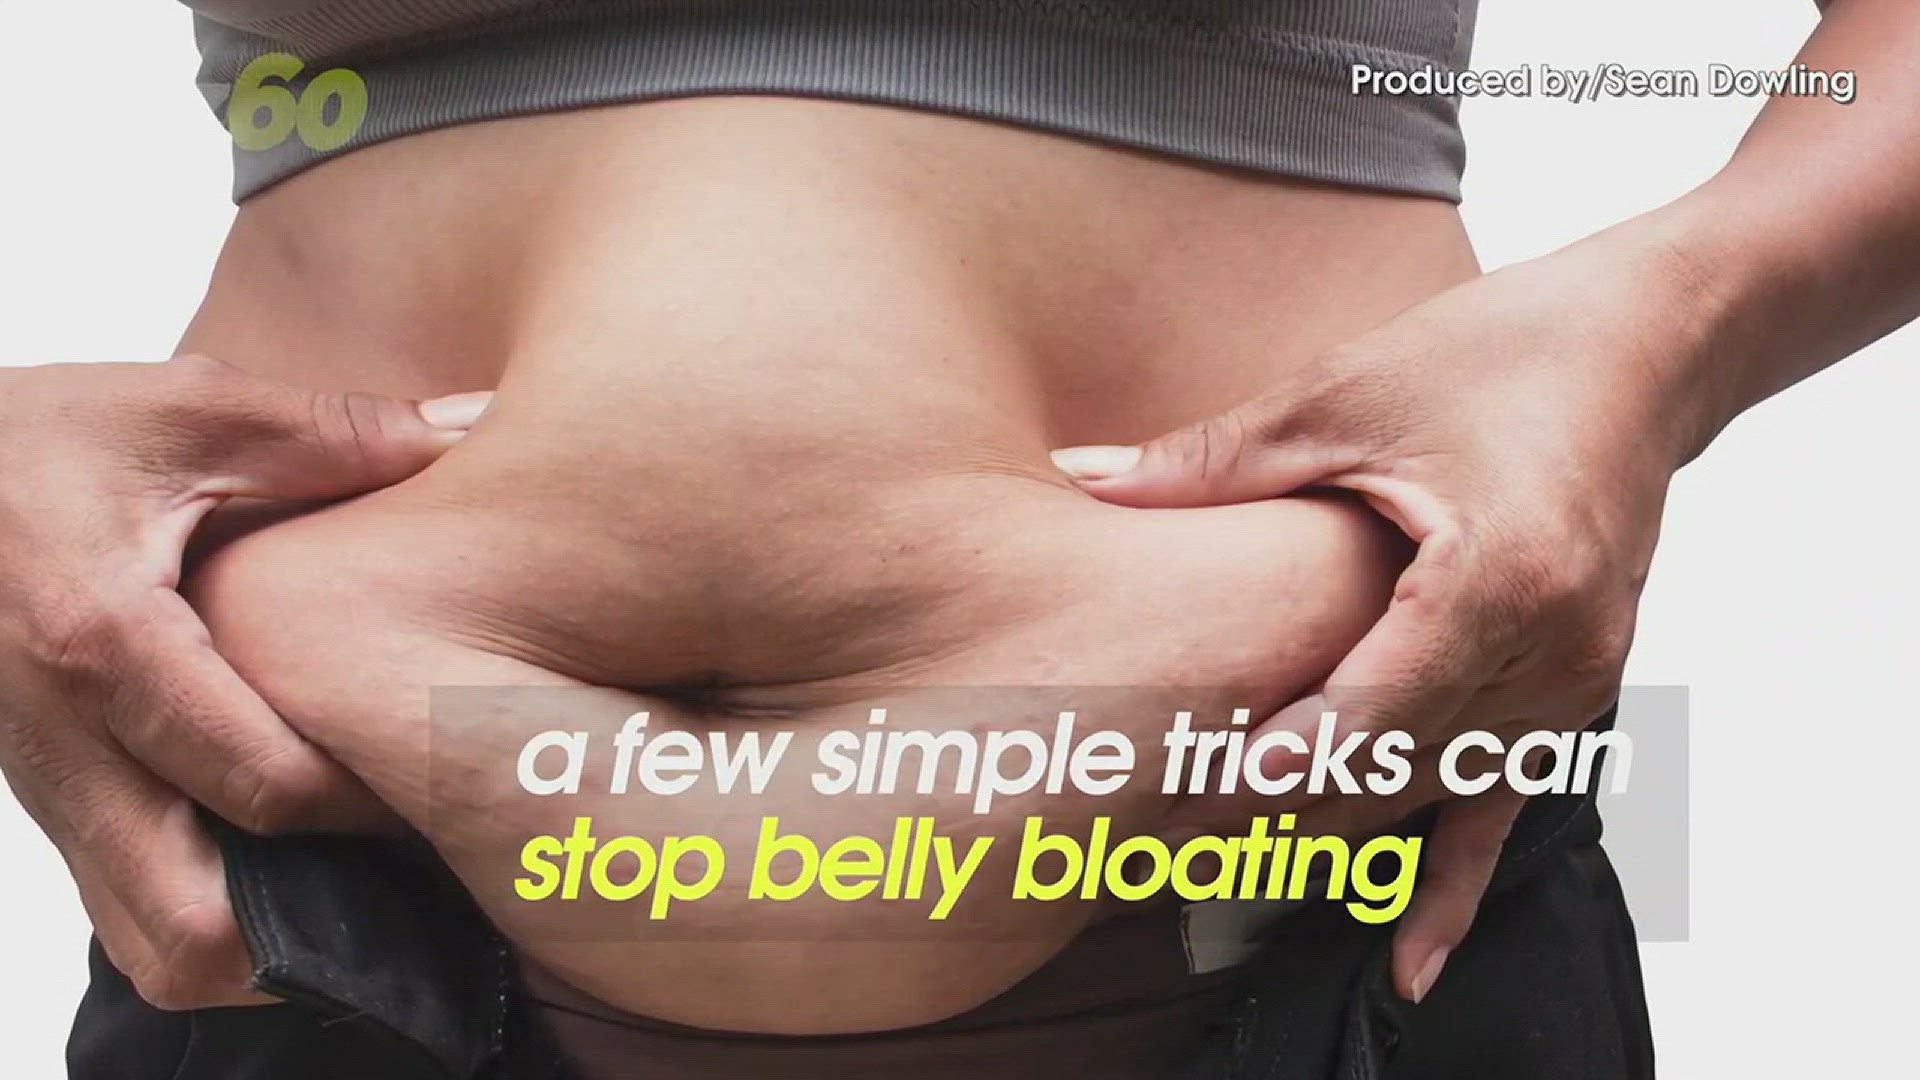 Belly bloat can ruin your day, but there are a few simple tips you can do to eliminate it. Sean Dowling (@seandowlingtv) has more.